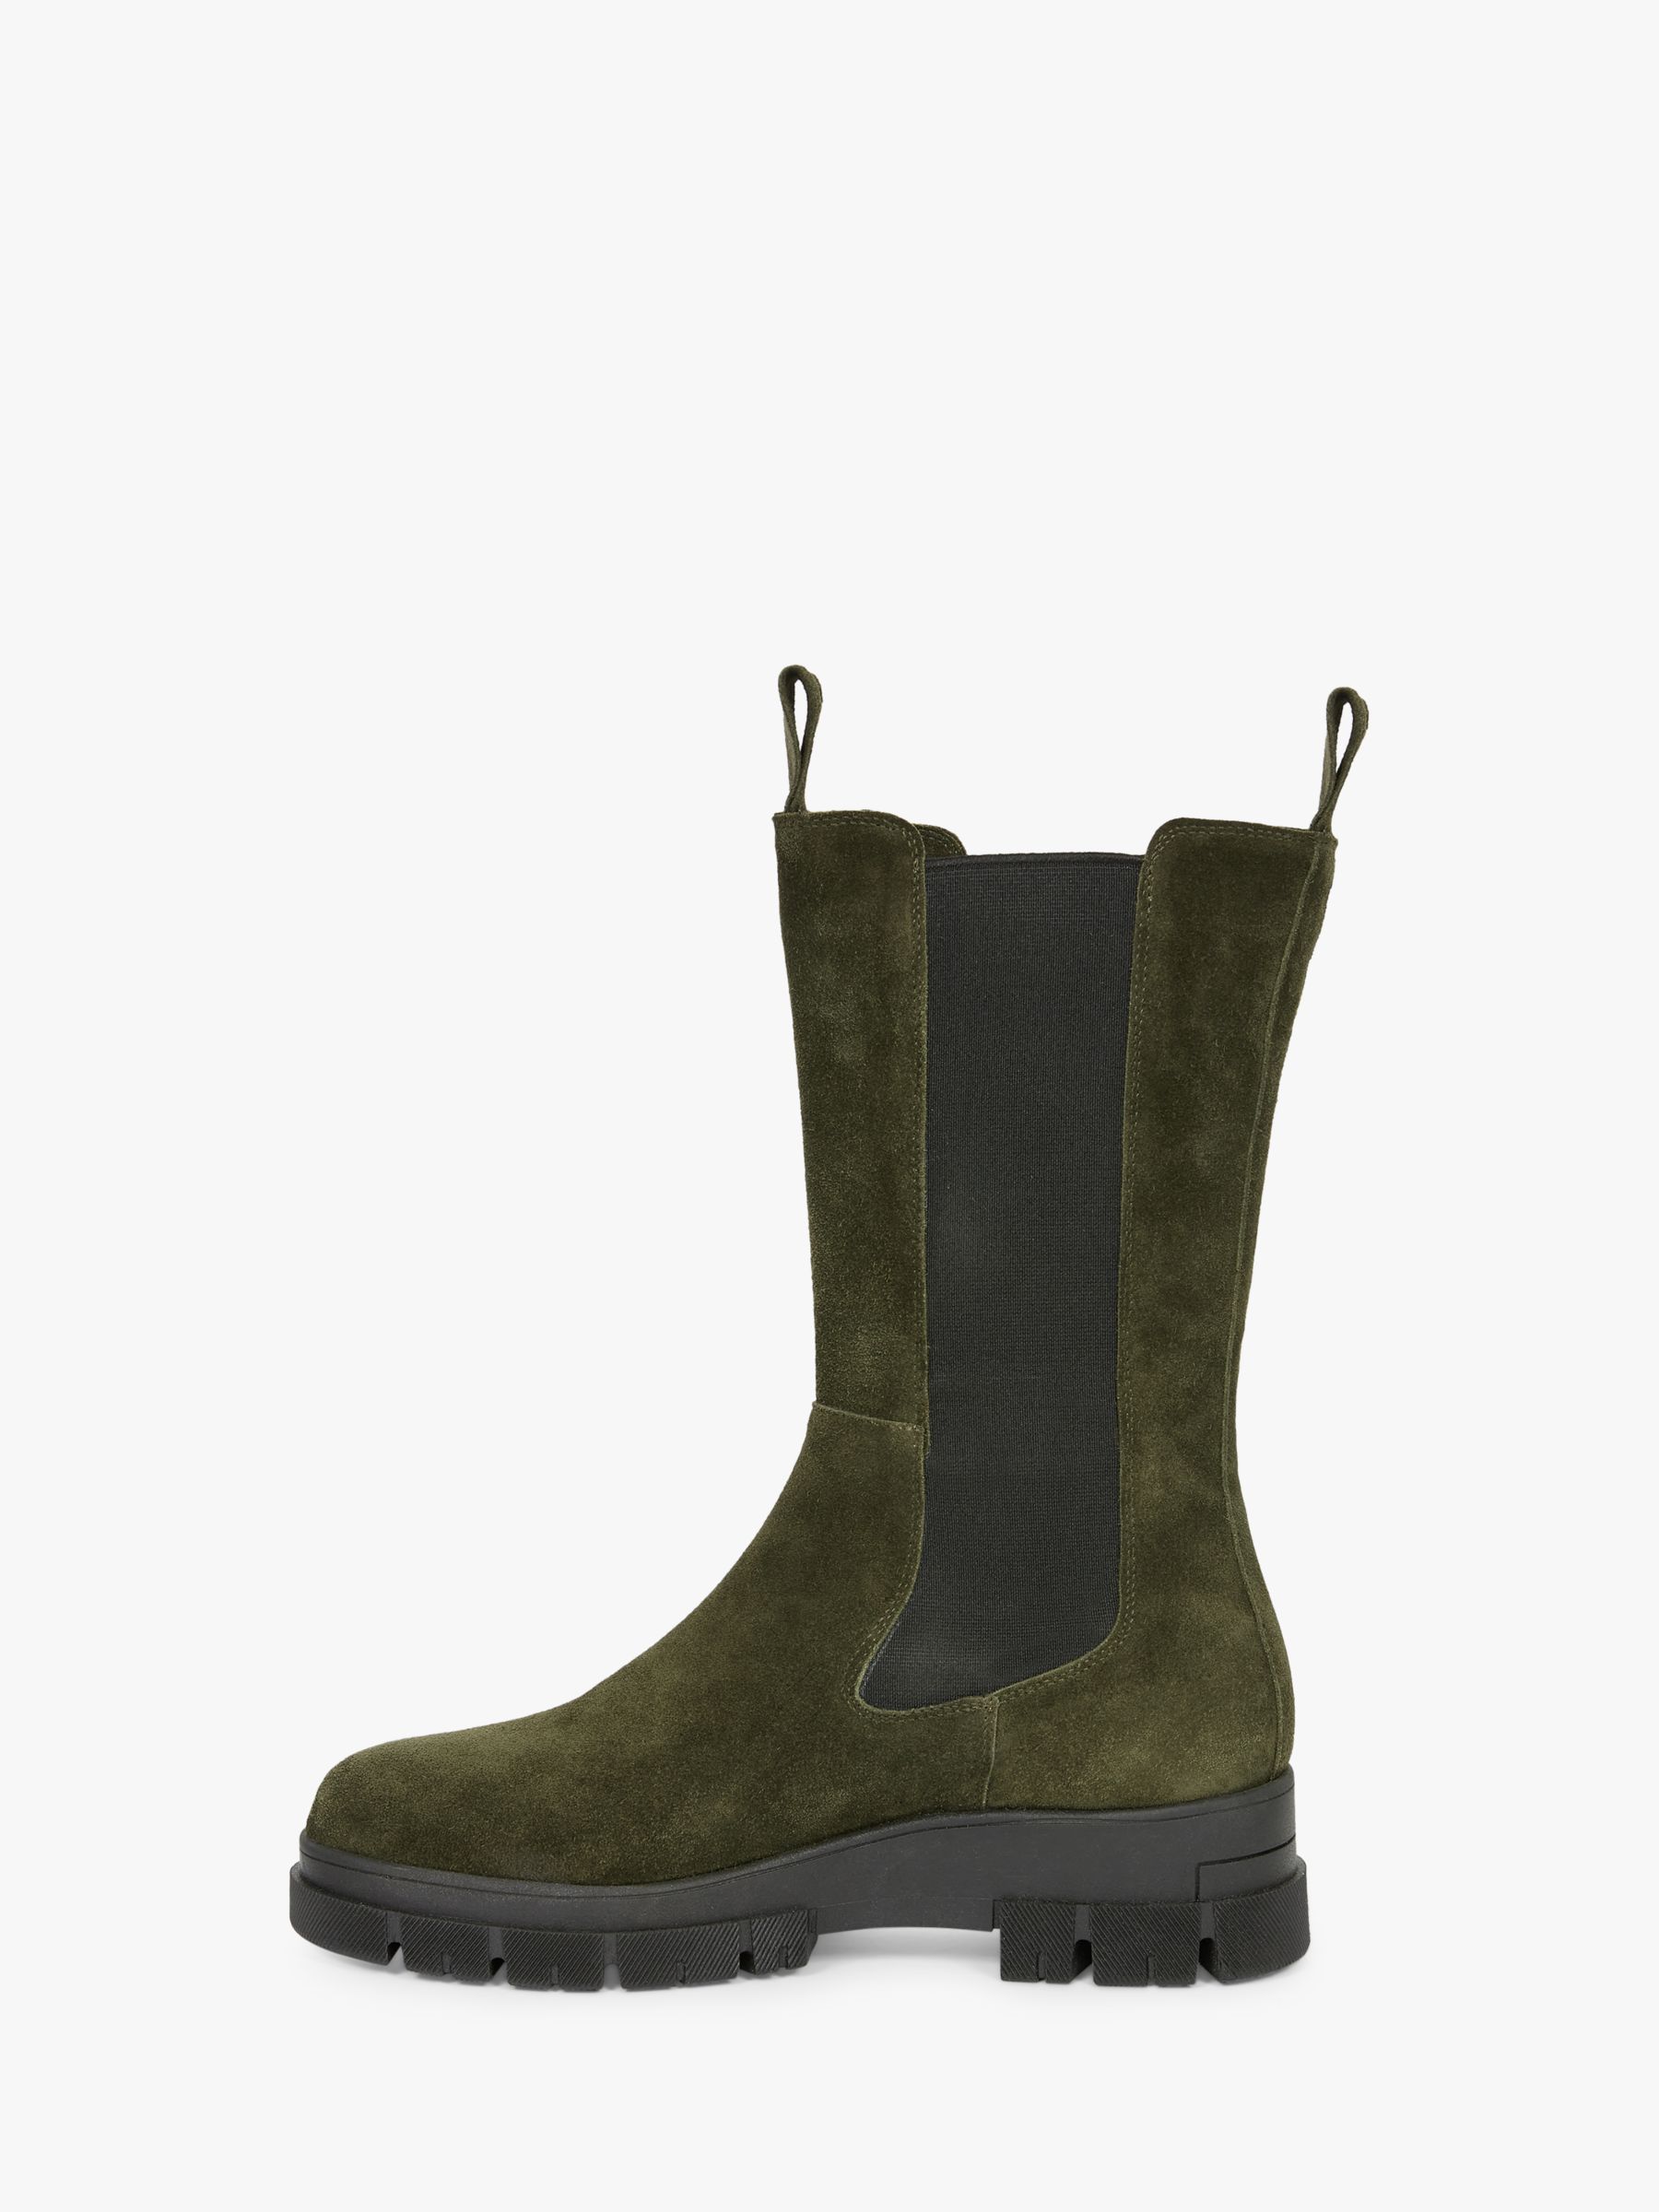 Celtic & Co. Chunky Tall Suede Chelsea Boot, Olive, 3